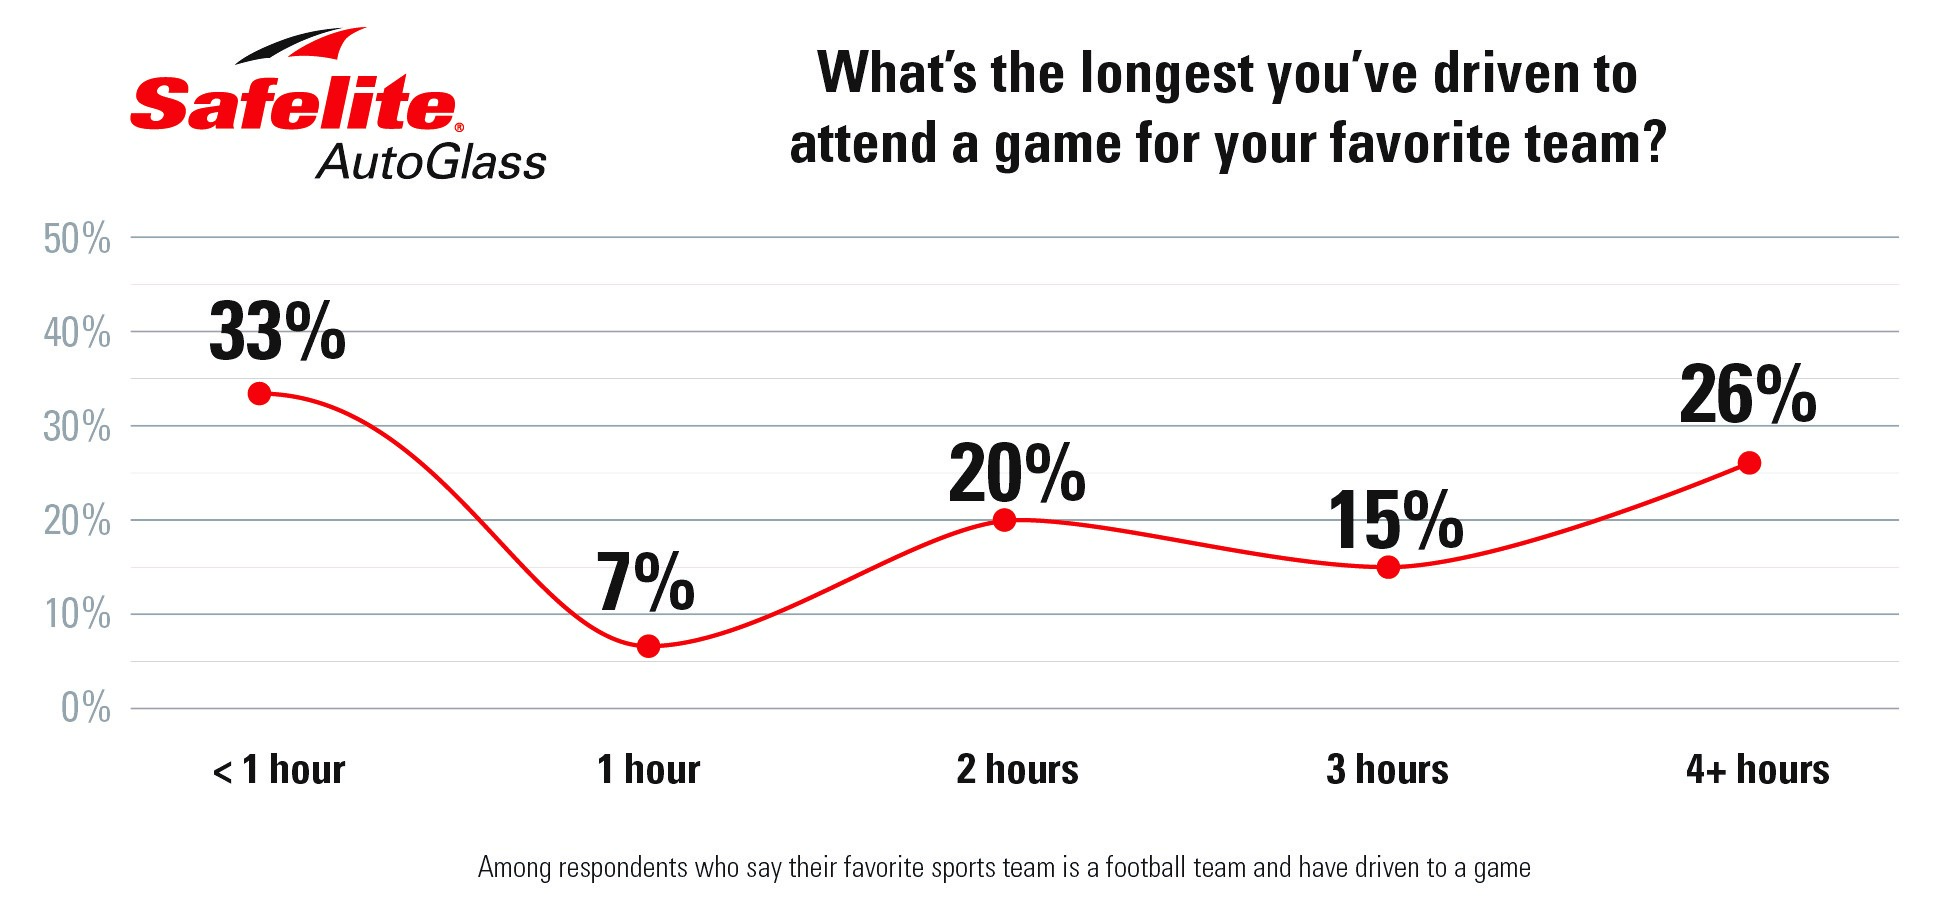 More than a a quarter of football fans have driven 4+ hours to see their favorite team, according to a recent Safelite study.